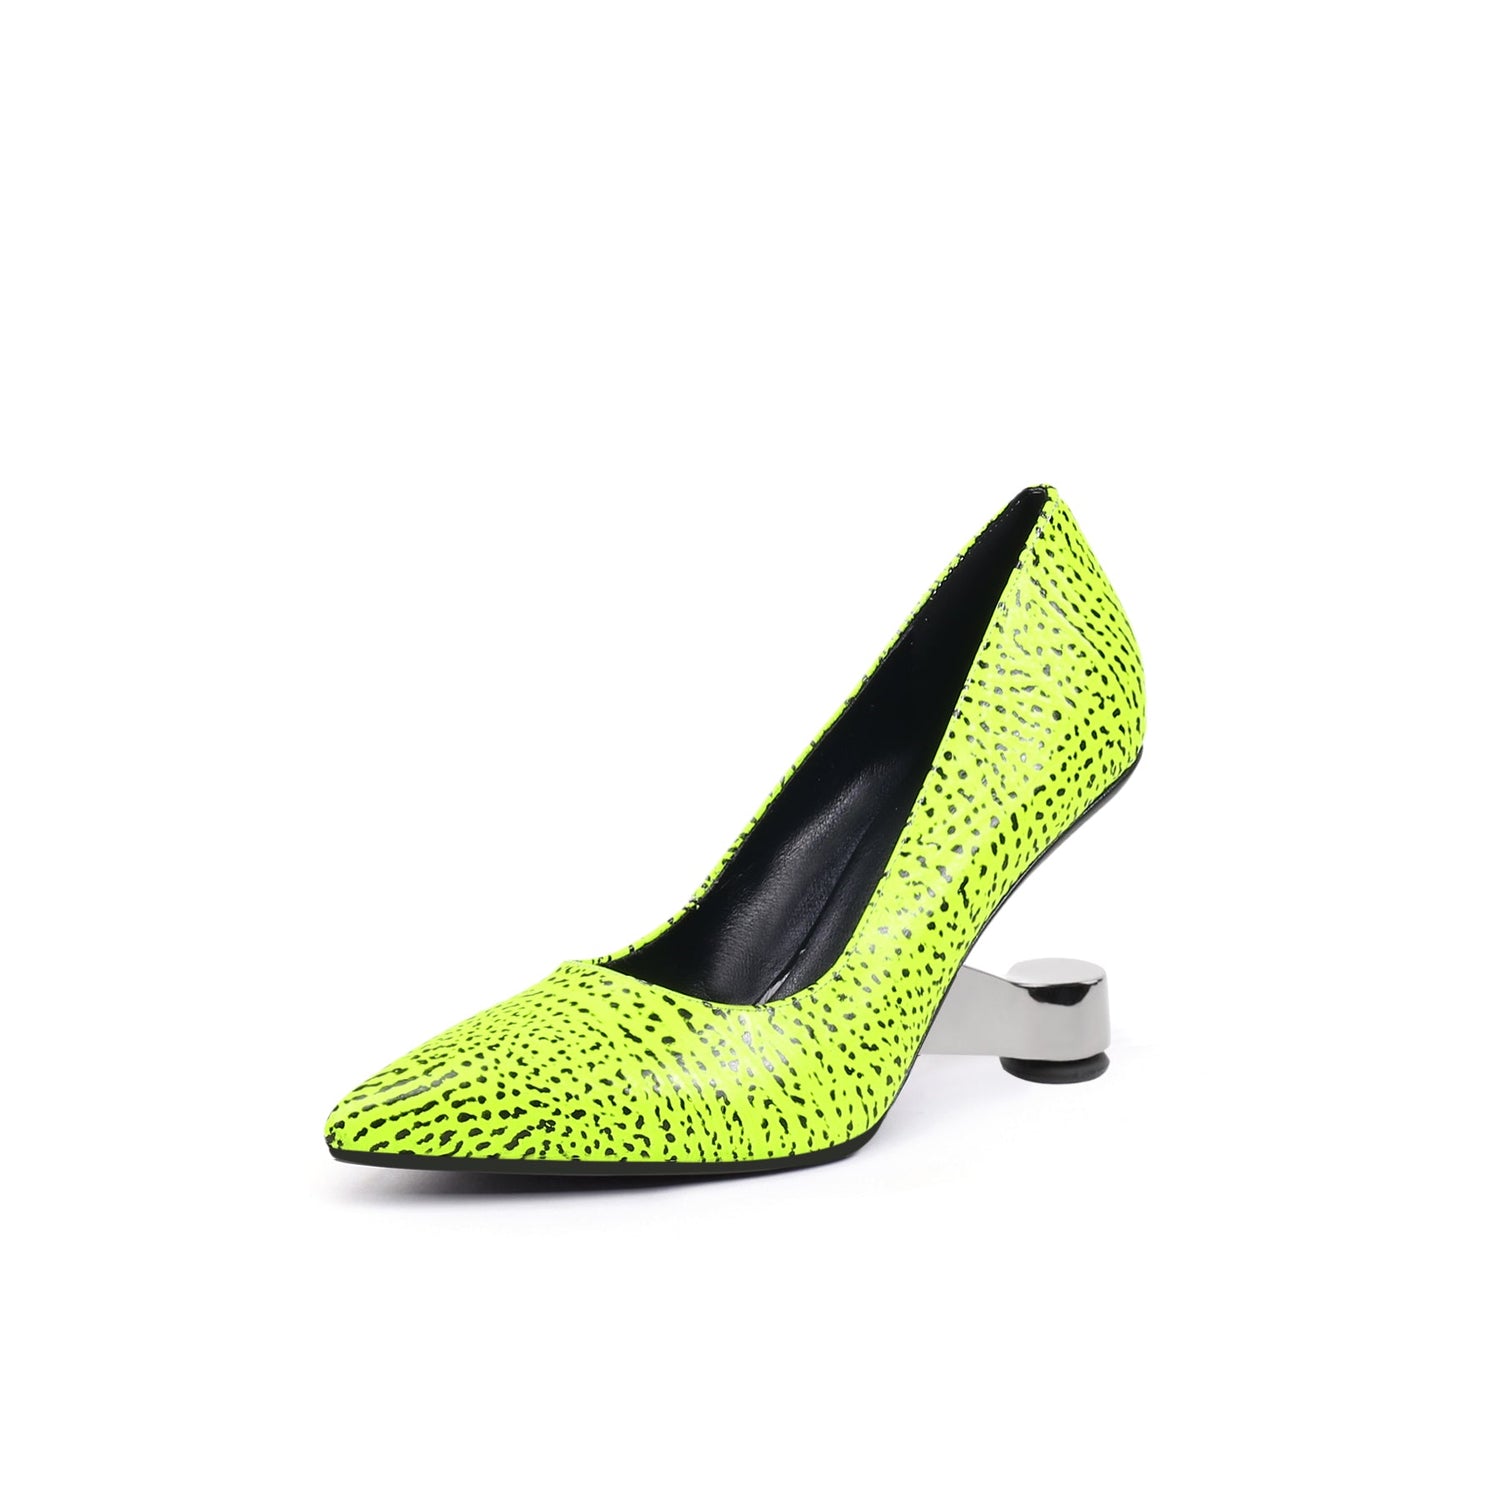 Pointed-Toe Faux Leather Green Pumps - 0cm